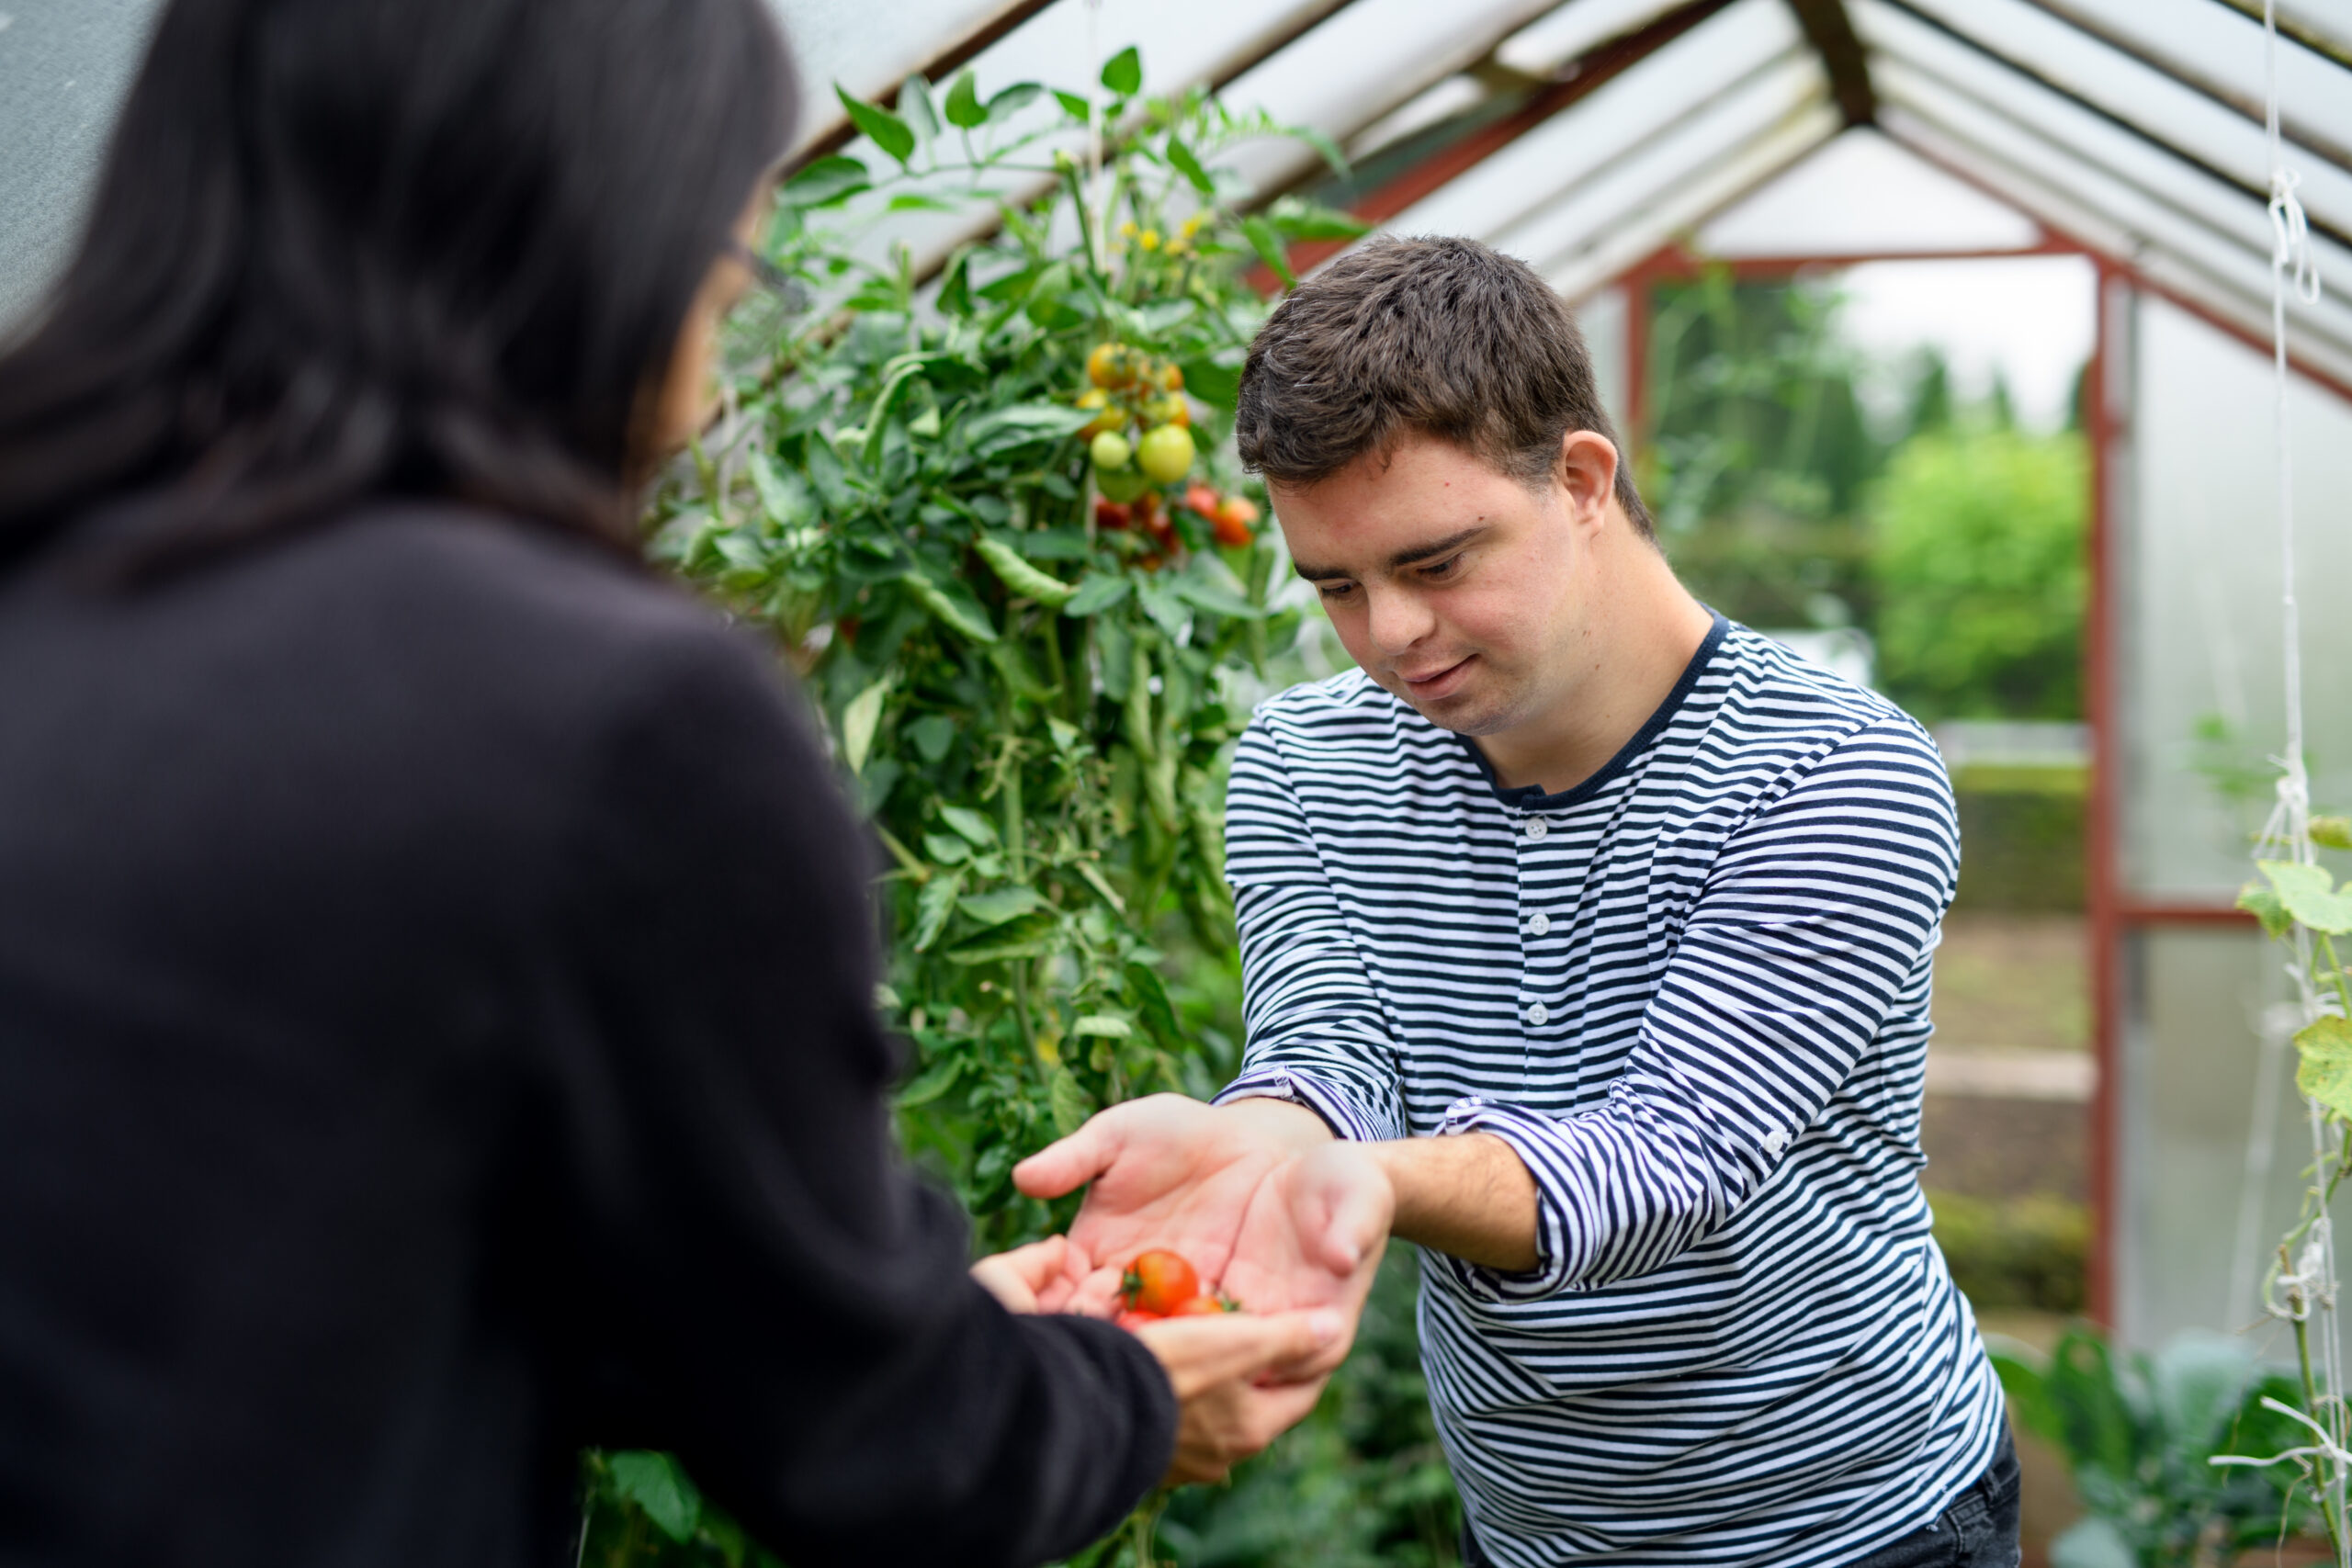 Individual picking tomatoes and asking how to treat an intellectual disability